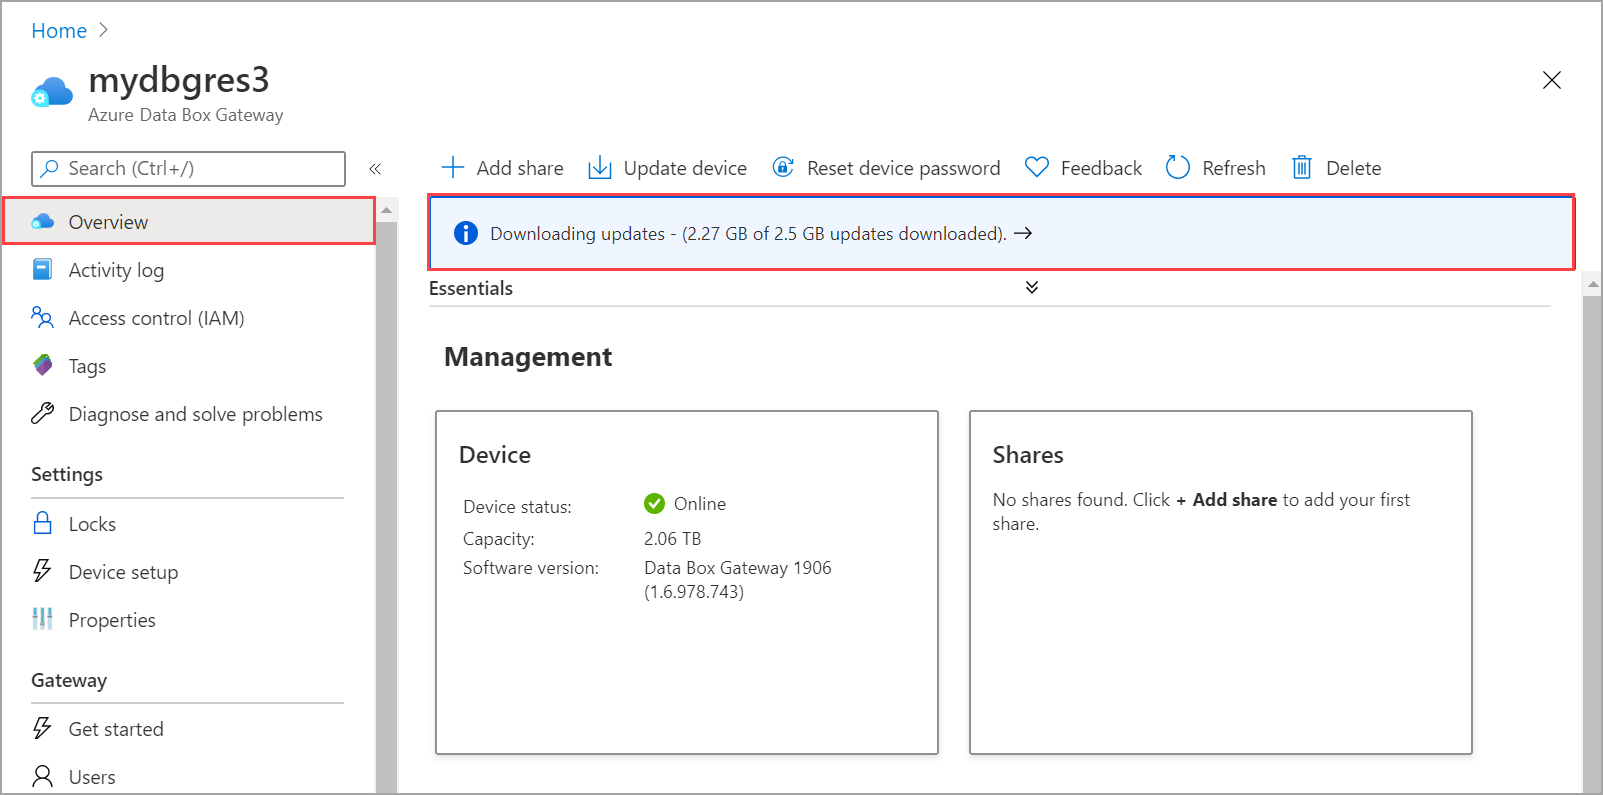 Screenshot of the Azure Data Box Gateway Home page with the Overview option and the Downloading updates notification banner called out.